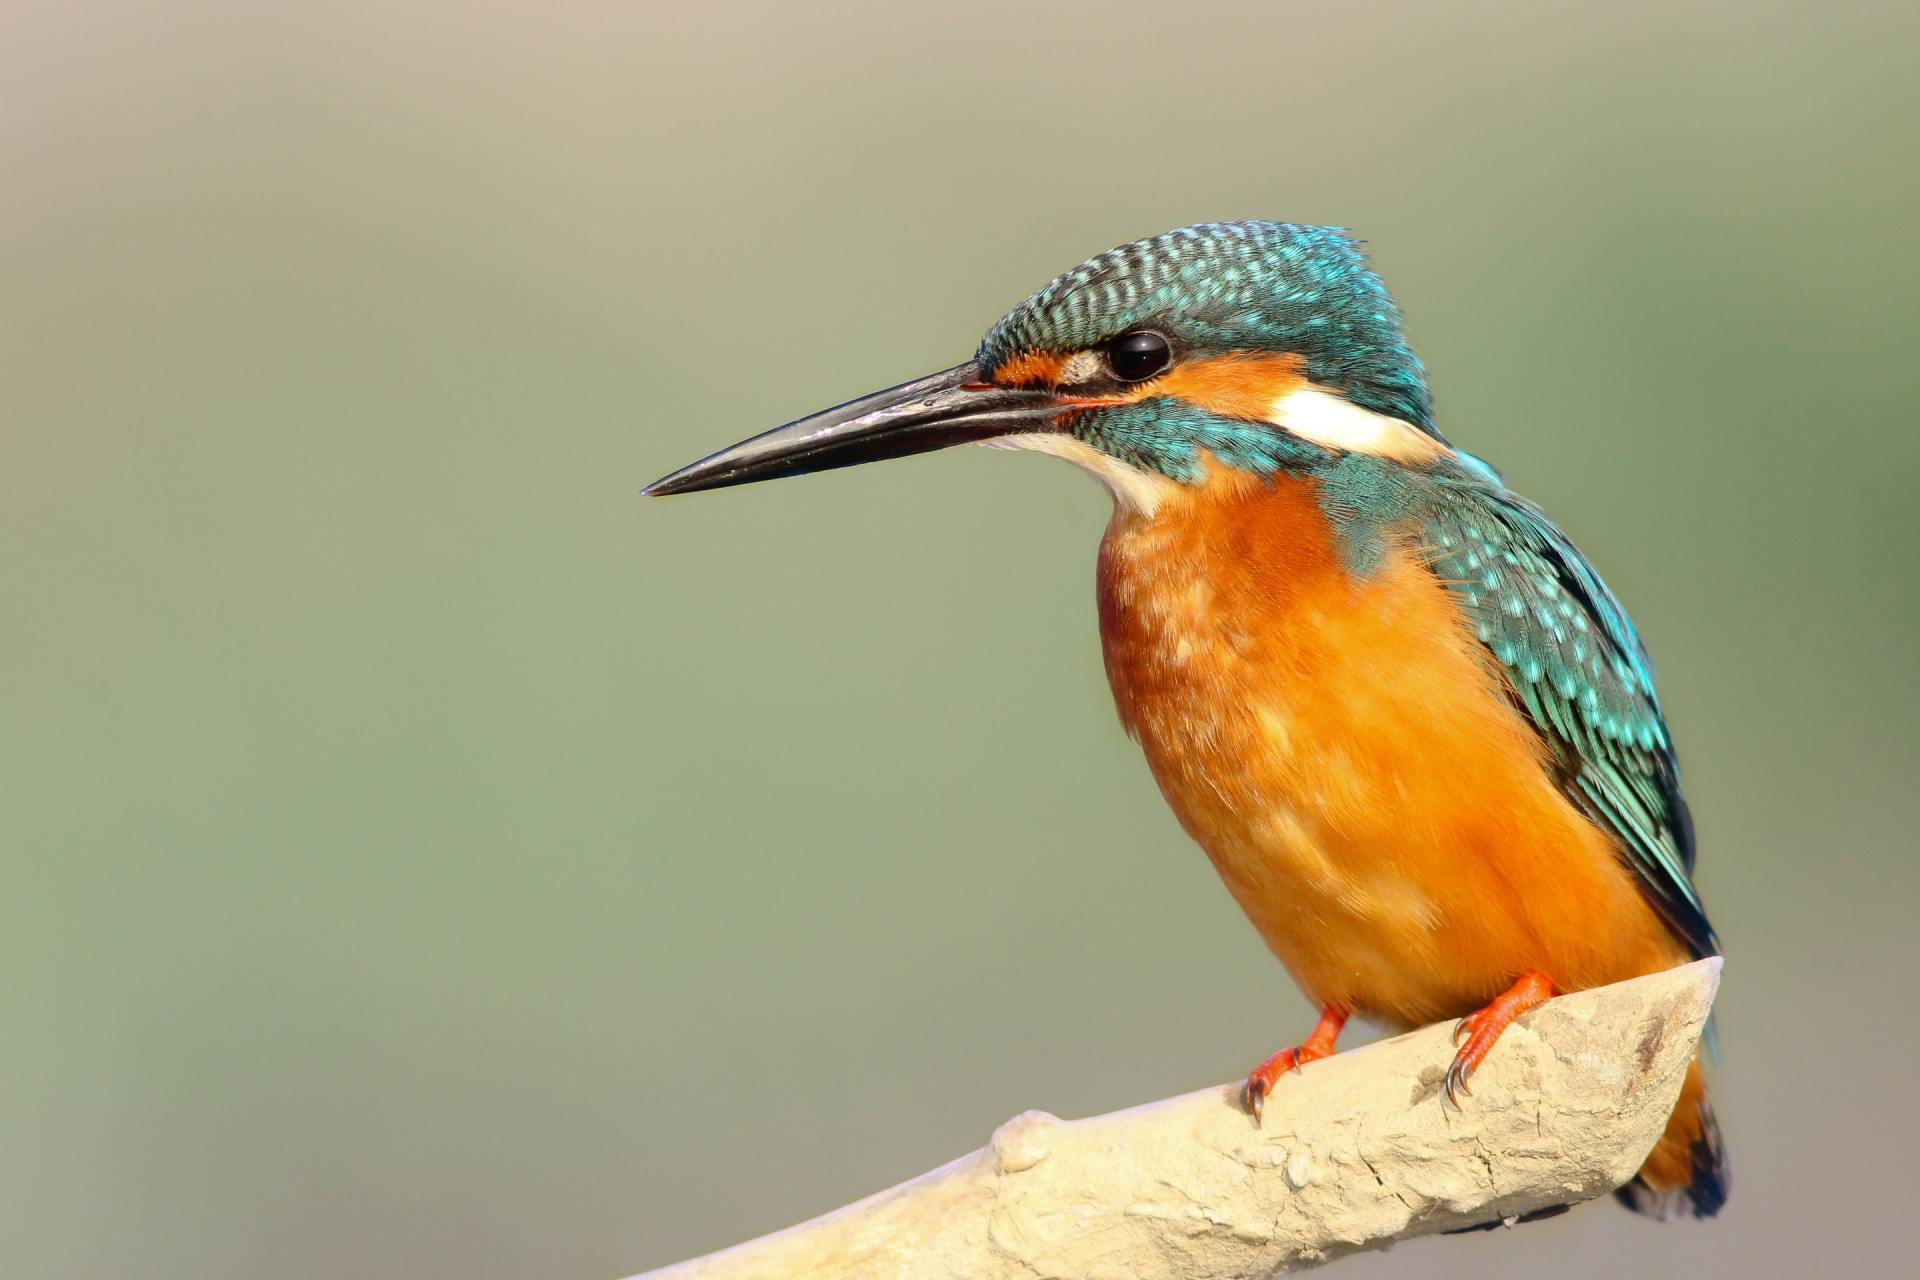 Kingfisher as an example